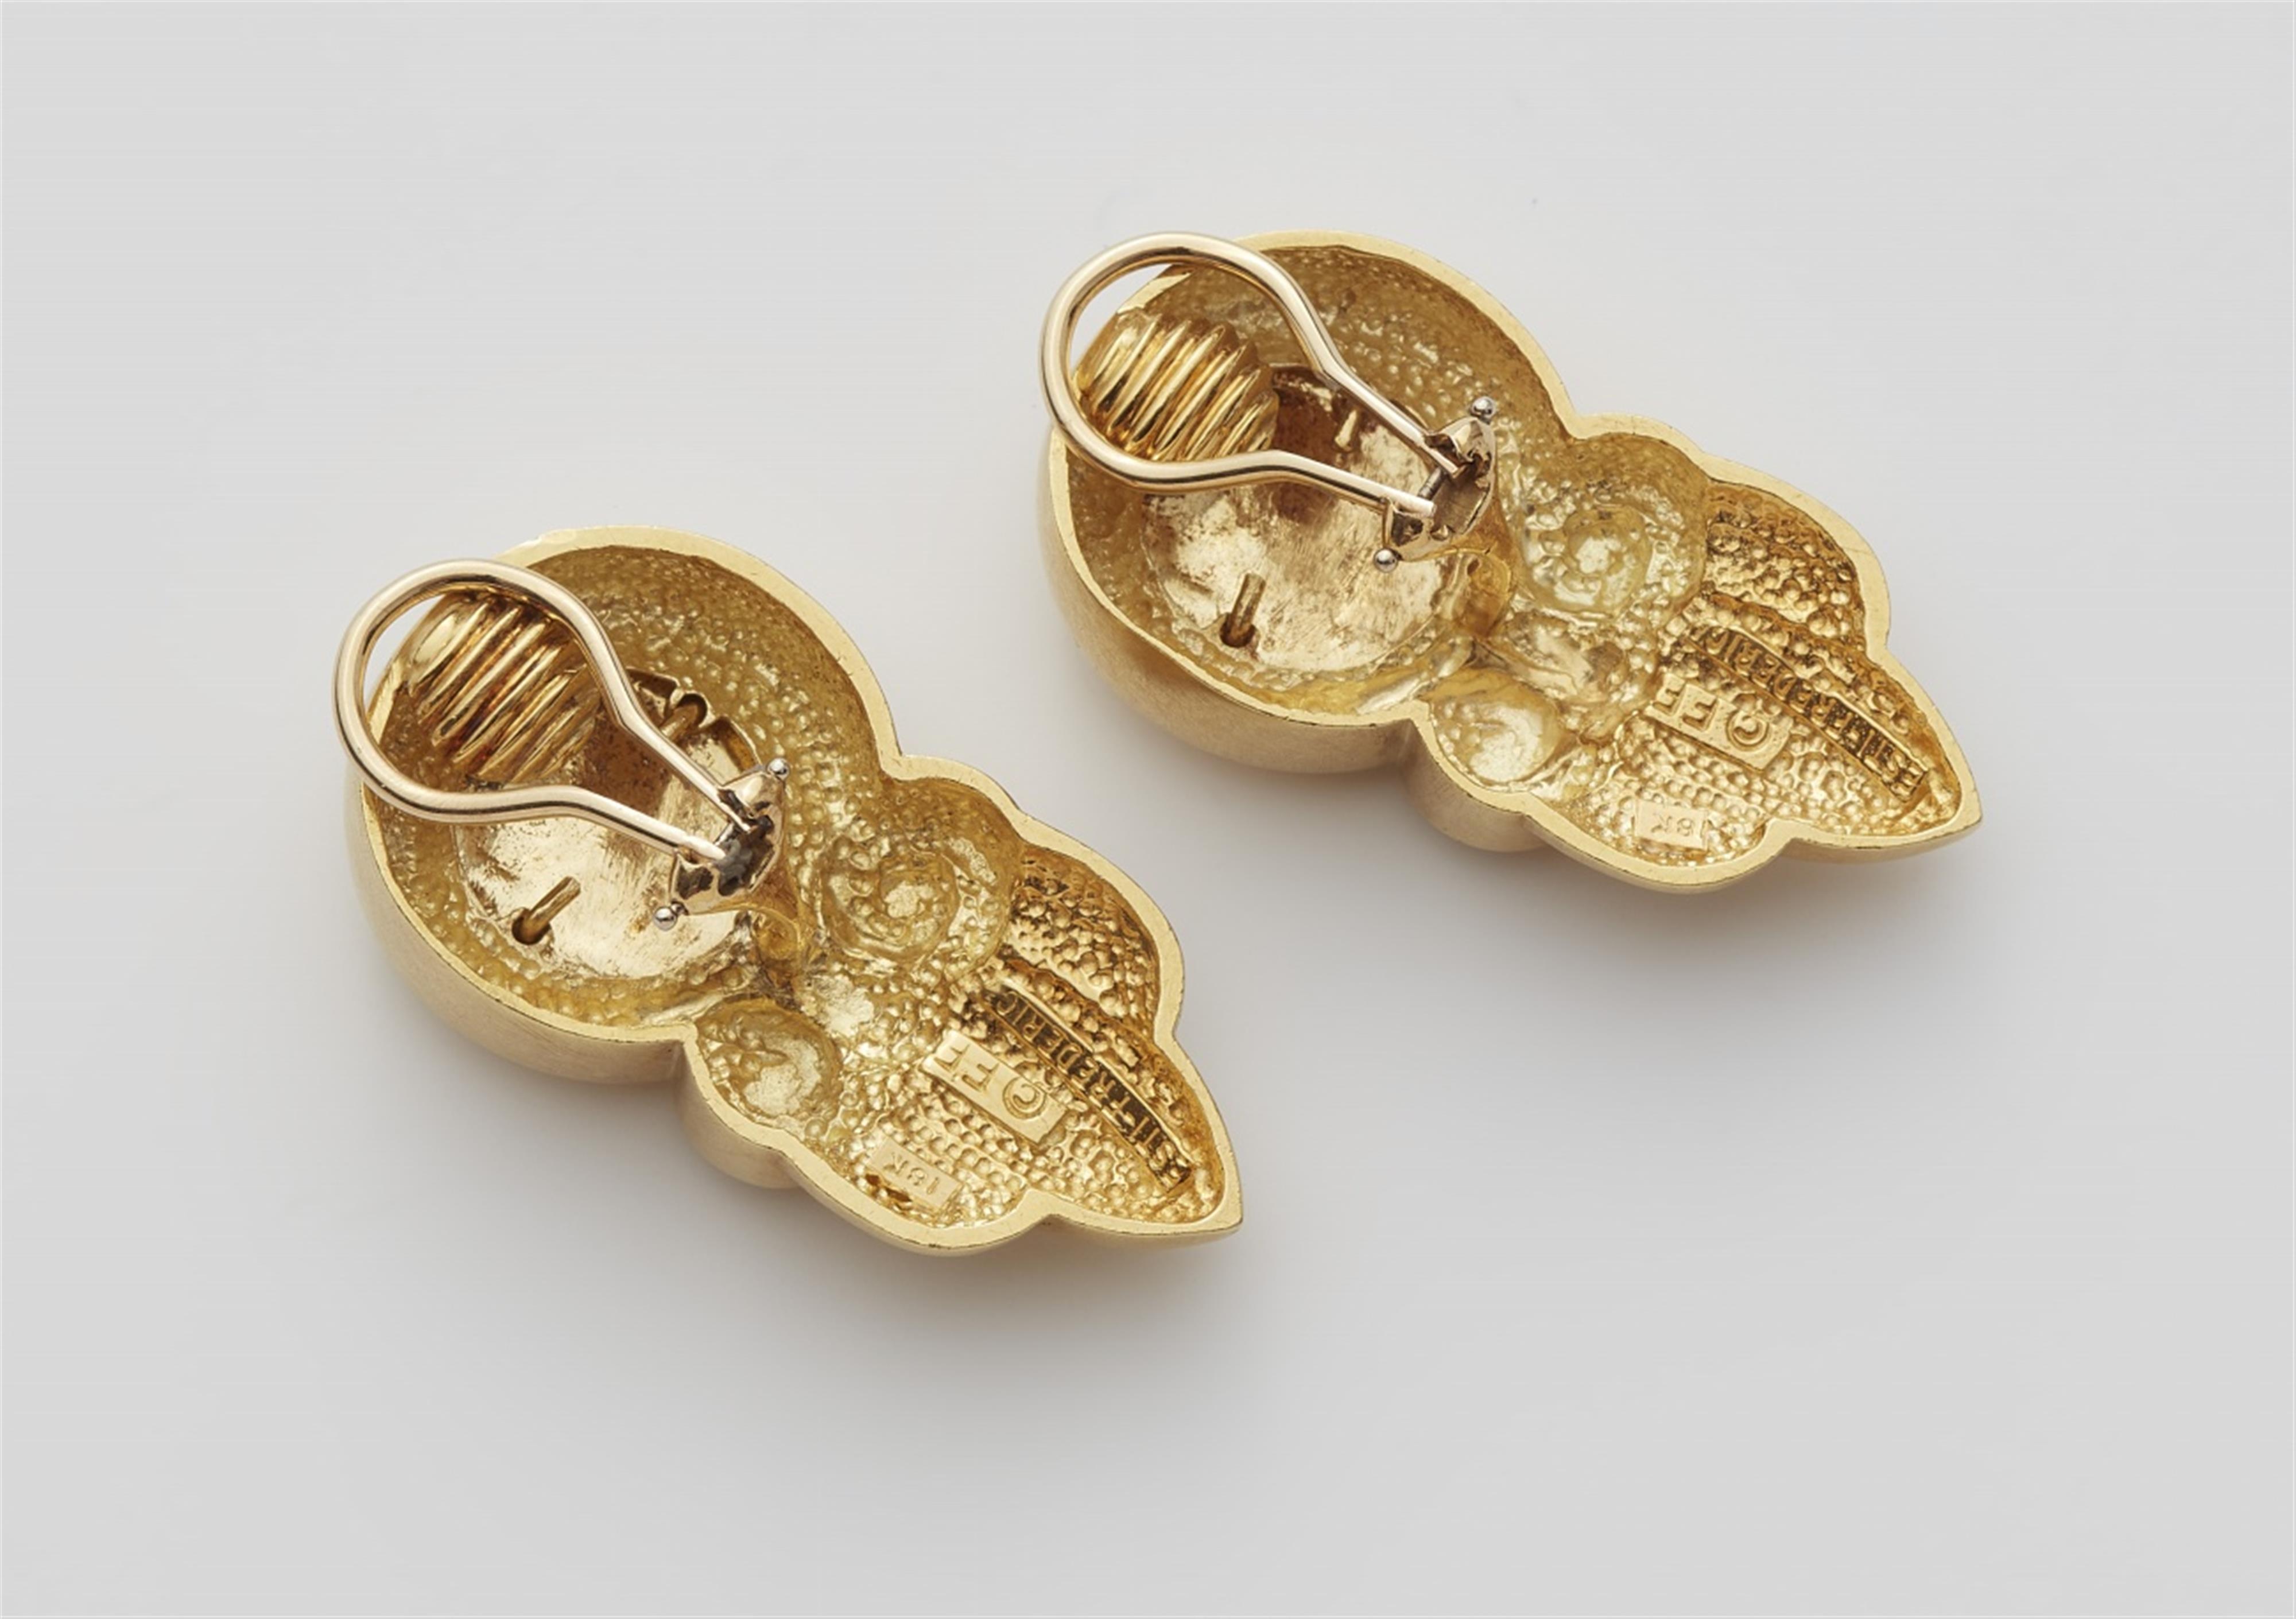 A pair of 18k gold Antique Revival style earrings - image-2